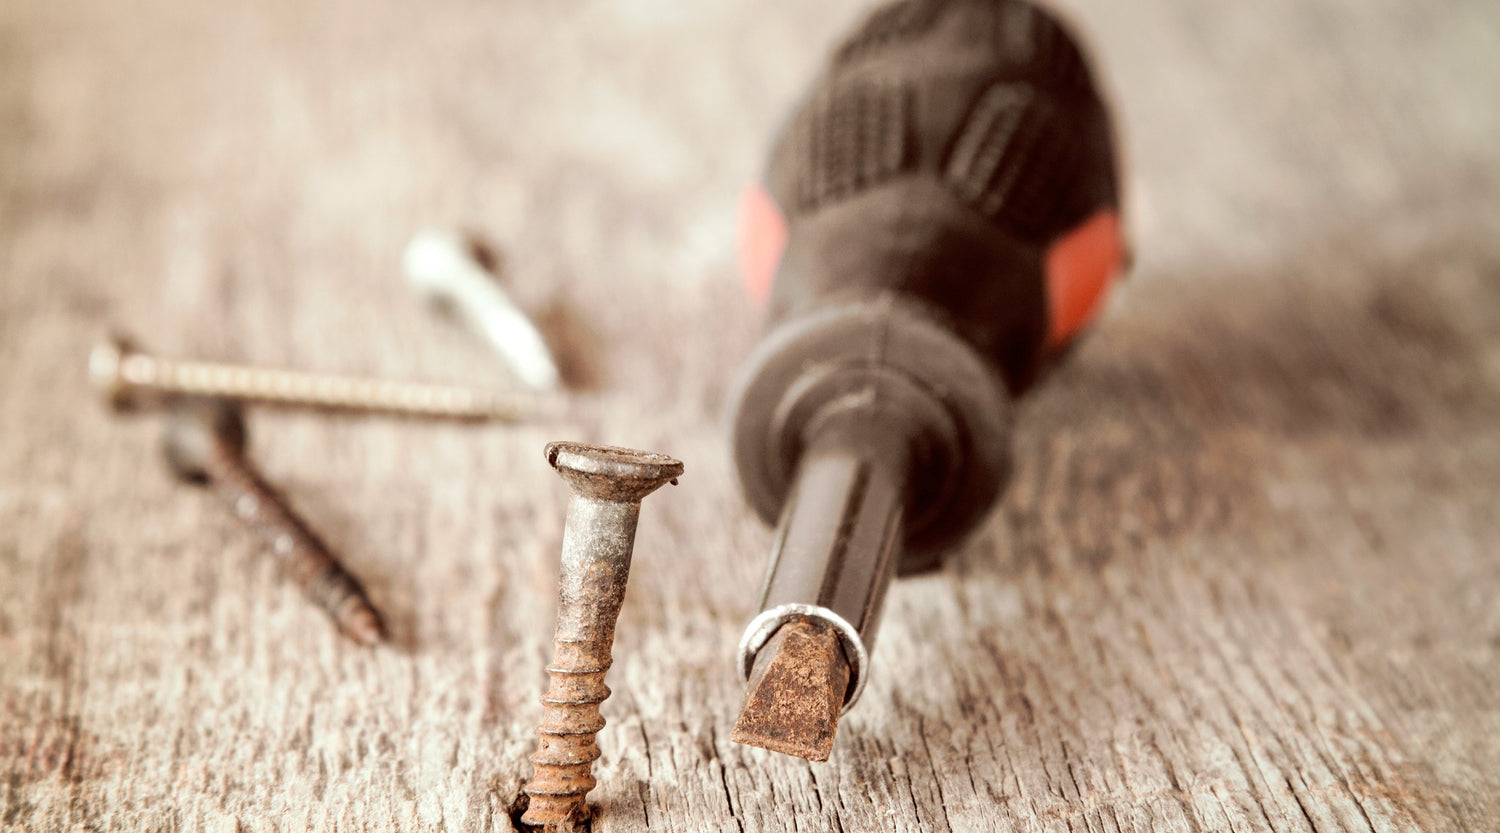 4 differences between an Allen key and a Screwdriver